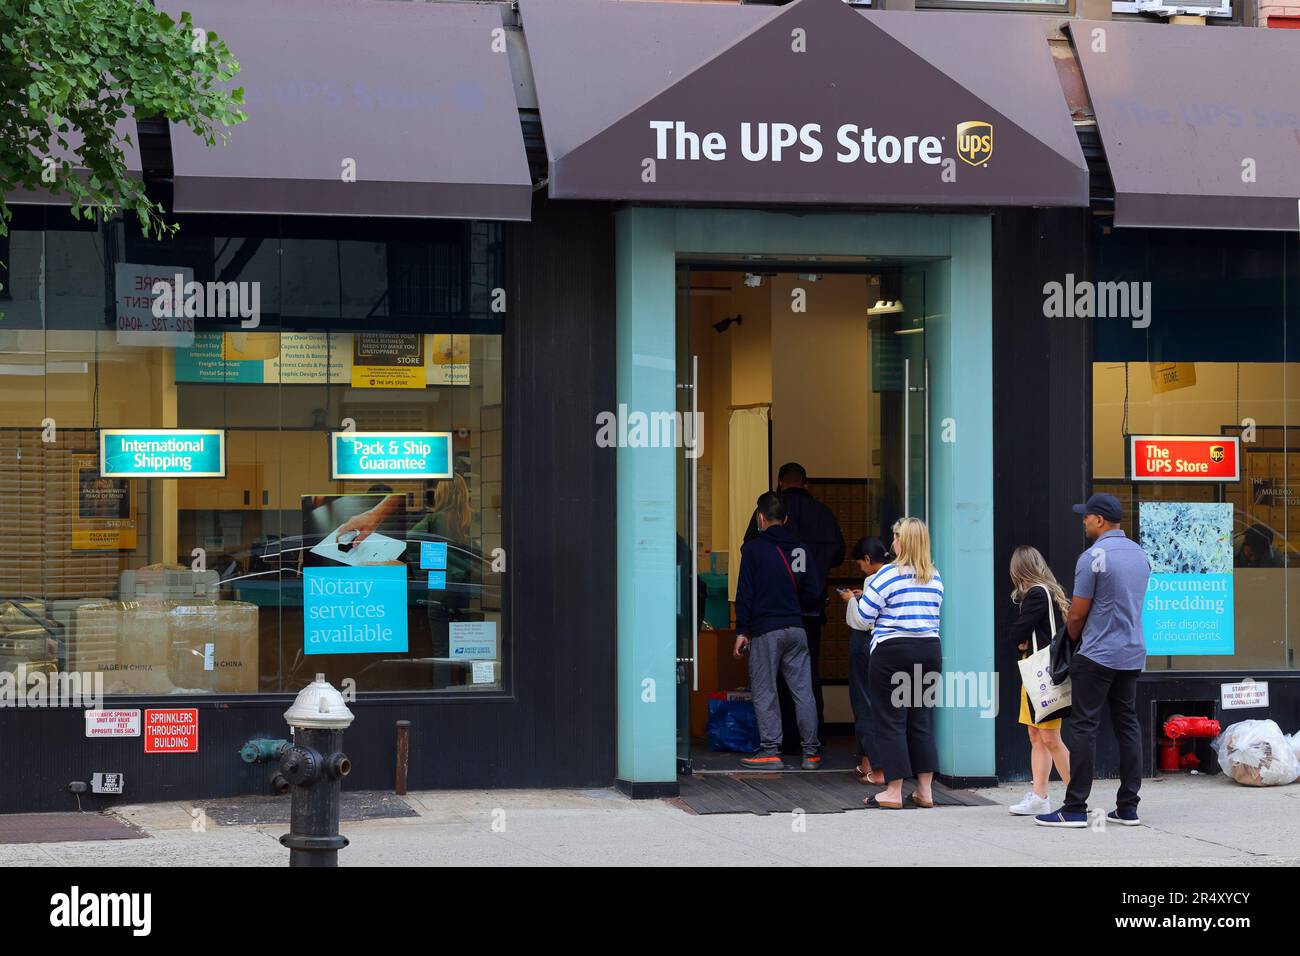 People queuing outside a UPS Store at 217 Centre St in Manhattan SoHo, New York. Stock Photo